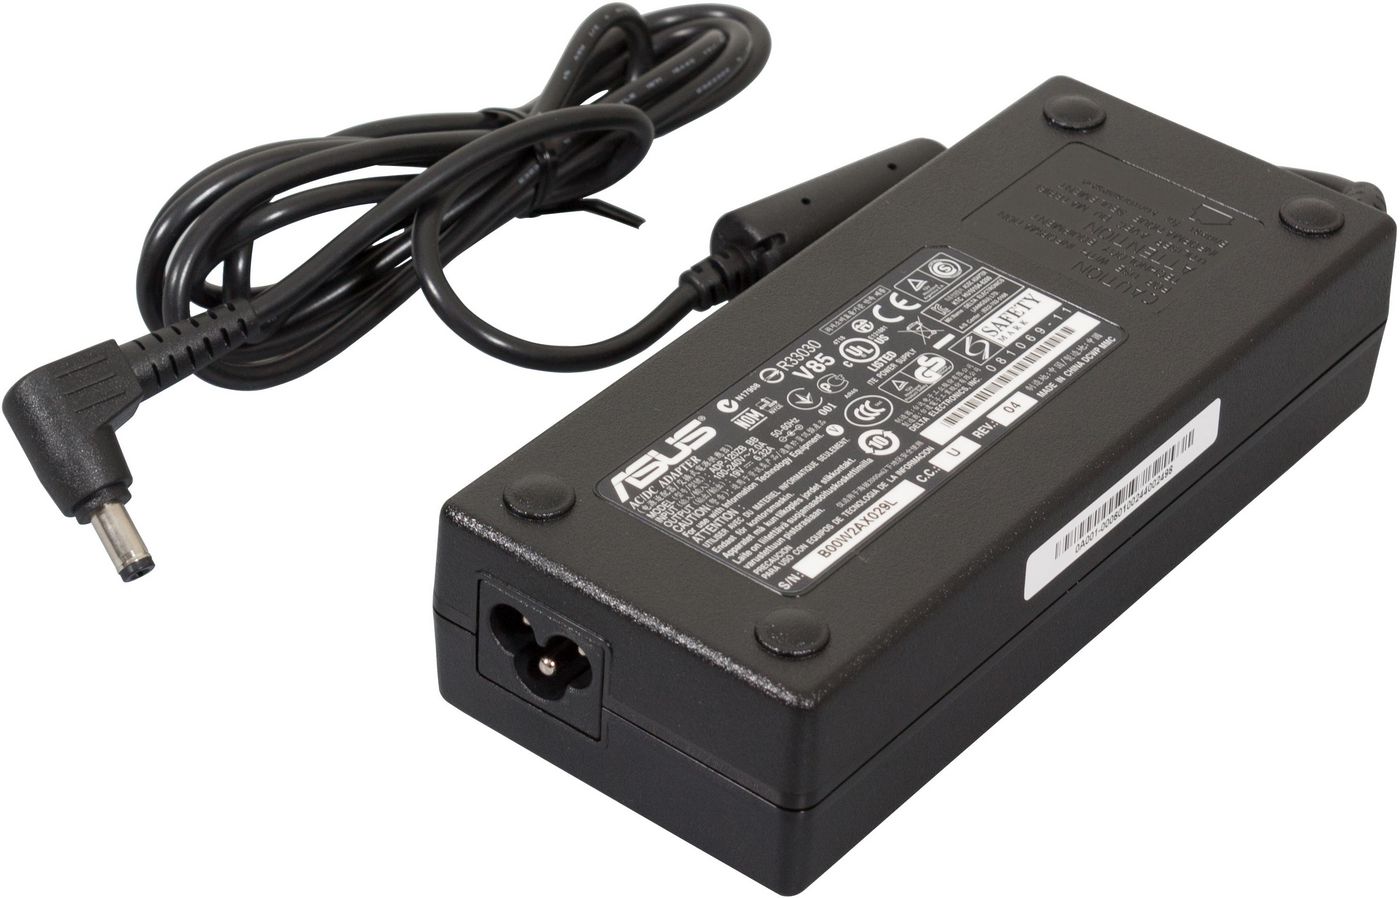 Asus 0A001-00060100 AC Adapter 120W19V3PINBLK 